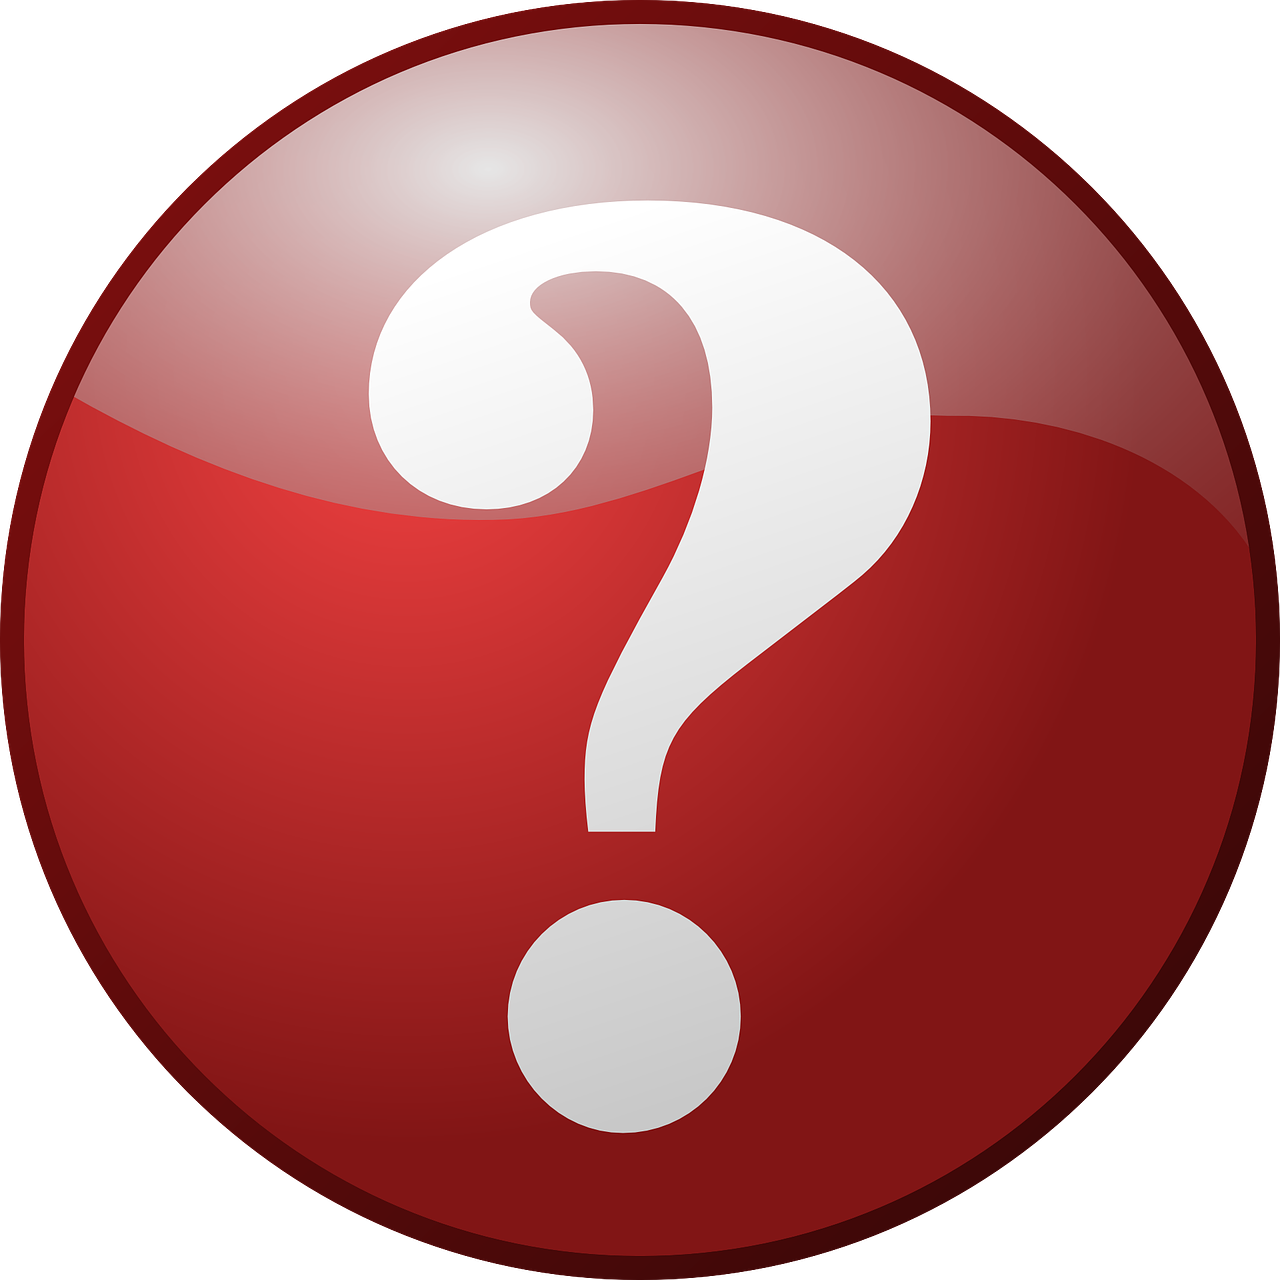 question mark button red free photo